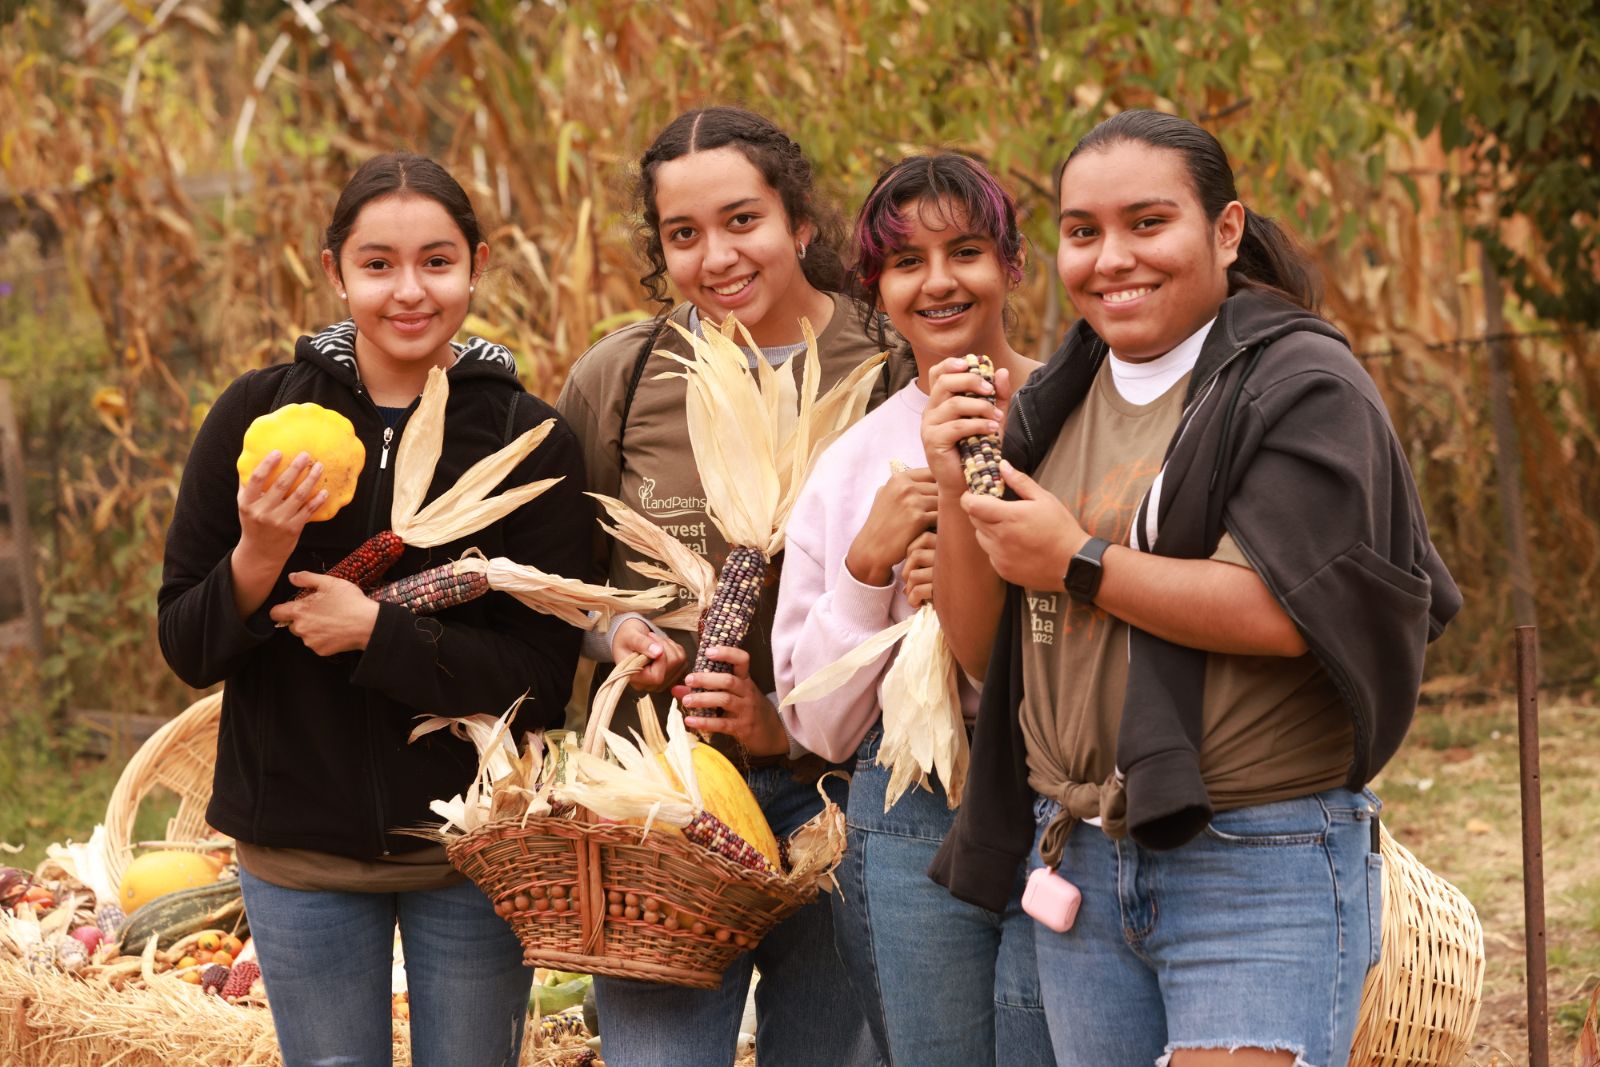 Four young people stand in front of golden corn stalks. They are smiling and hold freshly harvested squash and other vegetables from Bayer Farm. 